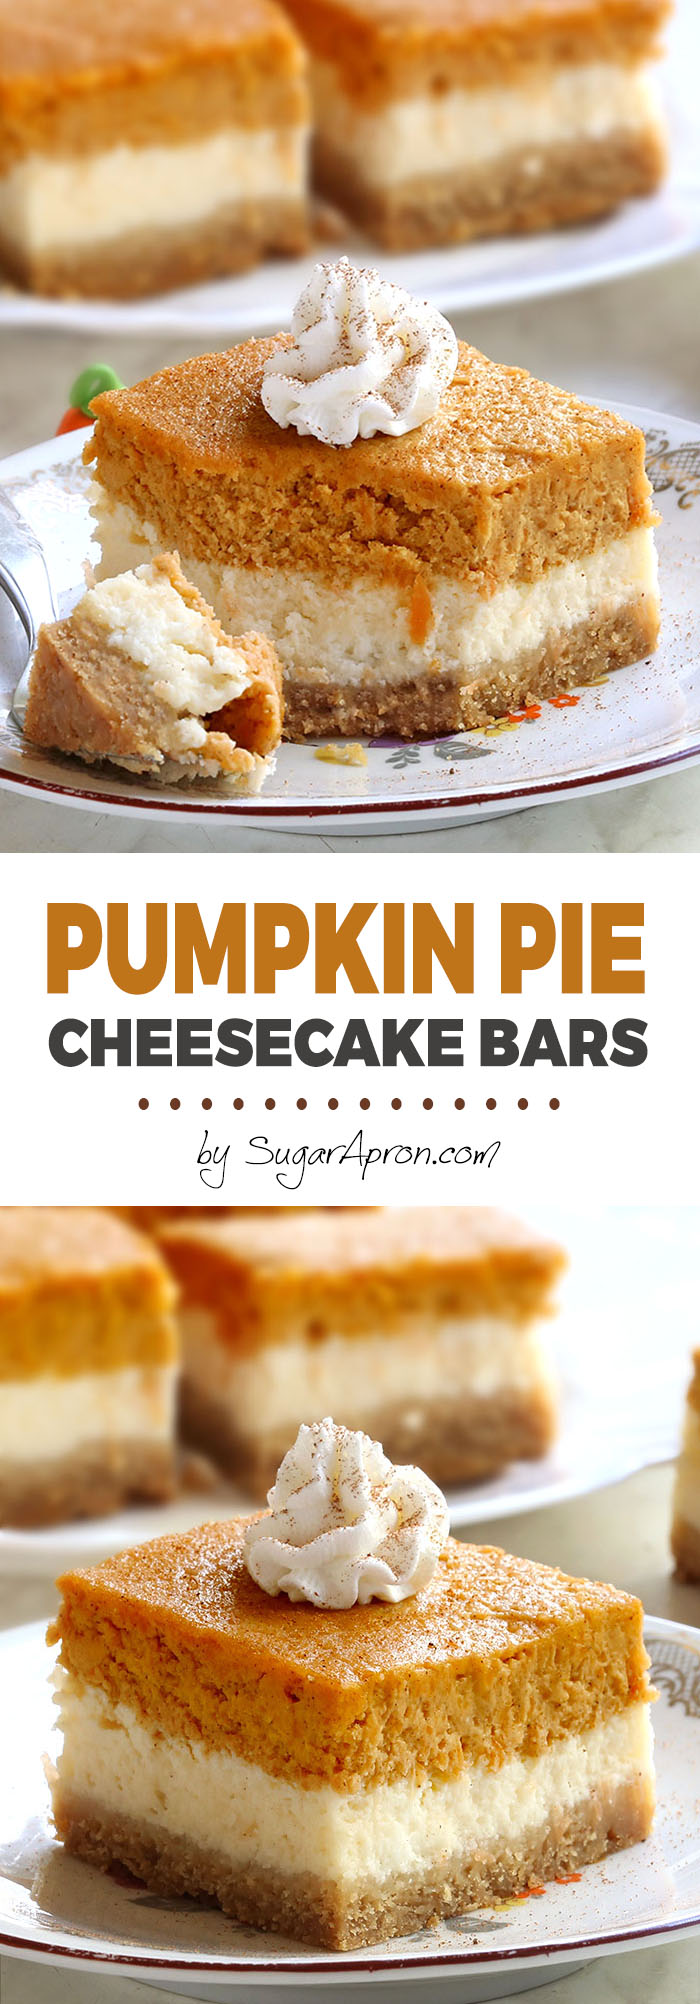 Pumpkin Pie Cheesecake Bars are everything you love about spiced pumpkin pie and tangy cheesecake, just packed into one sweet dessert. And let me tell you.....they’re absolutely delicious!!